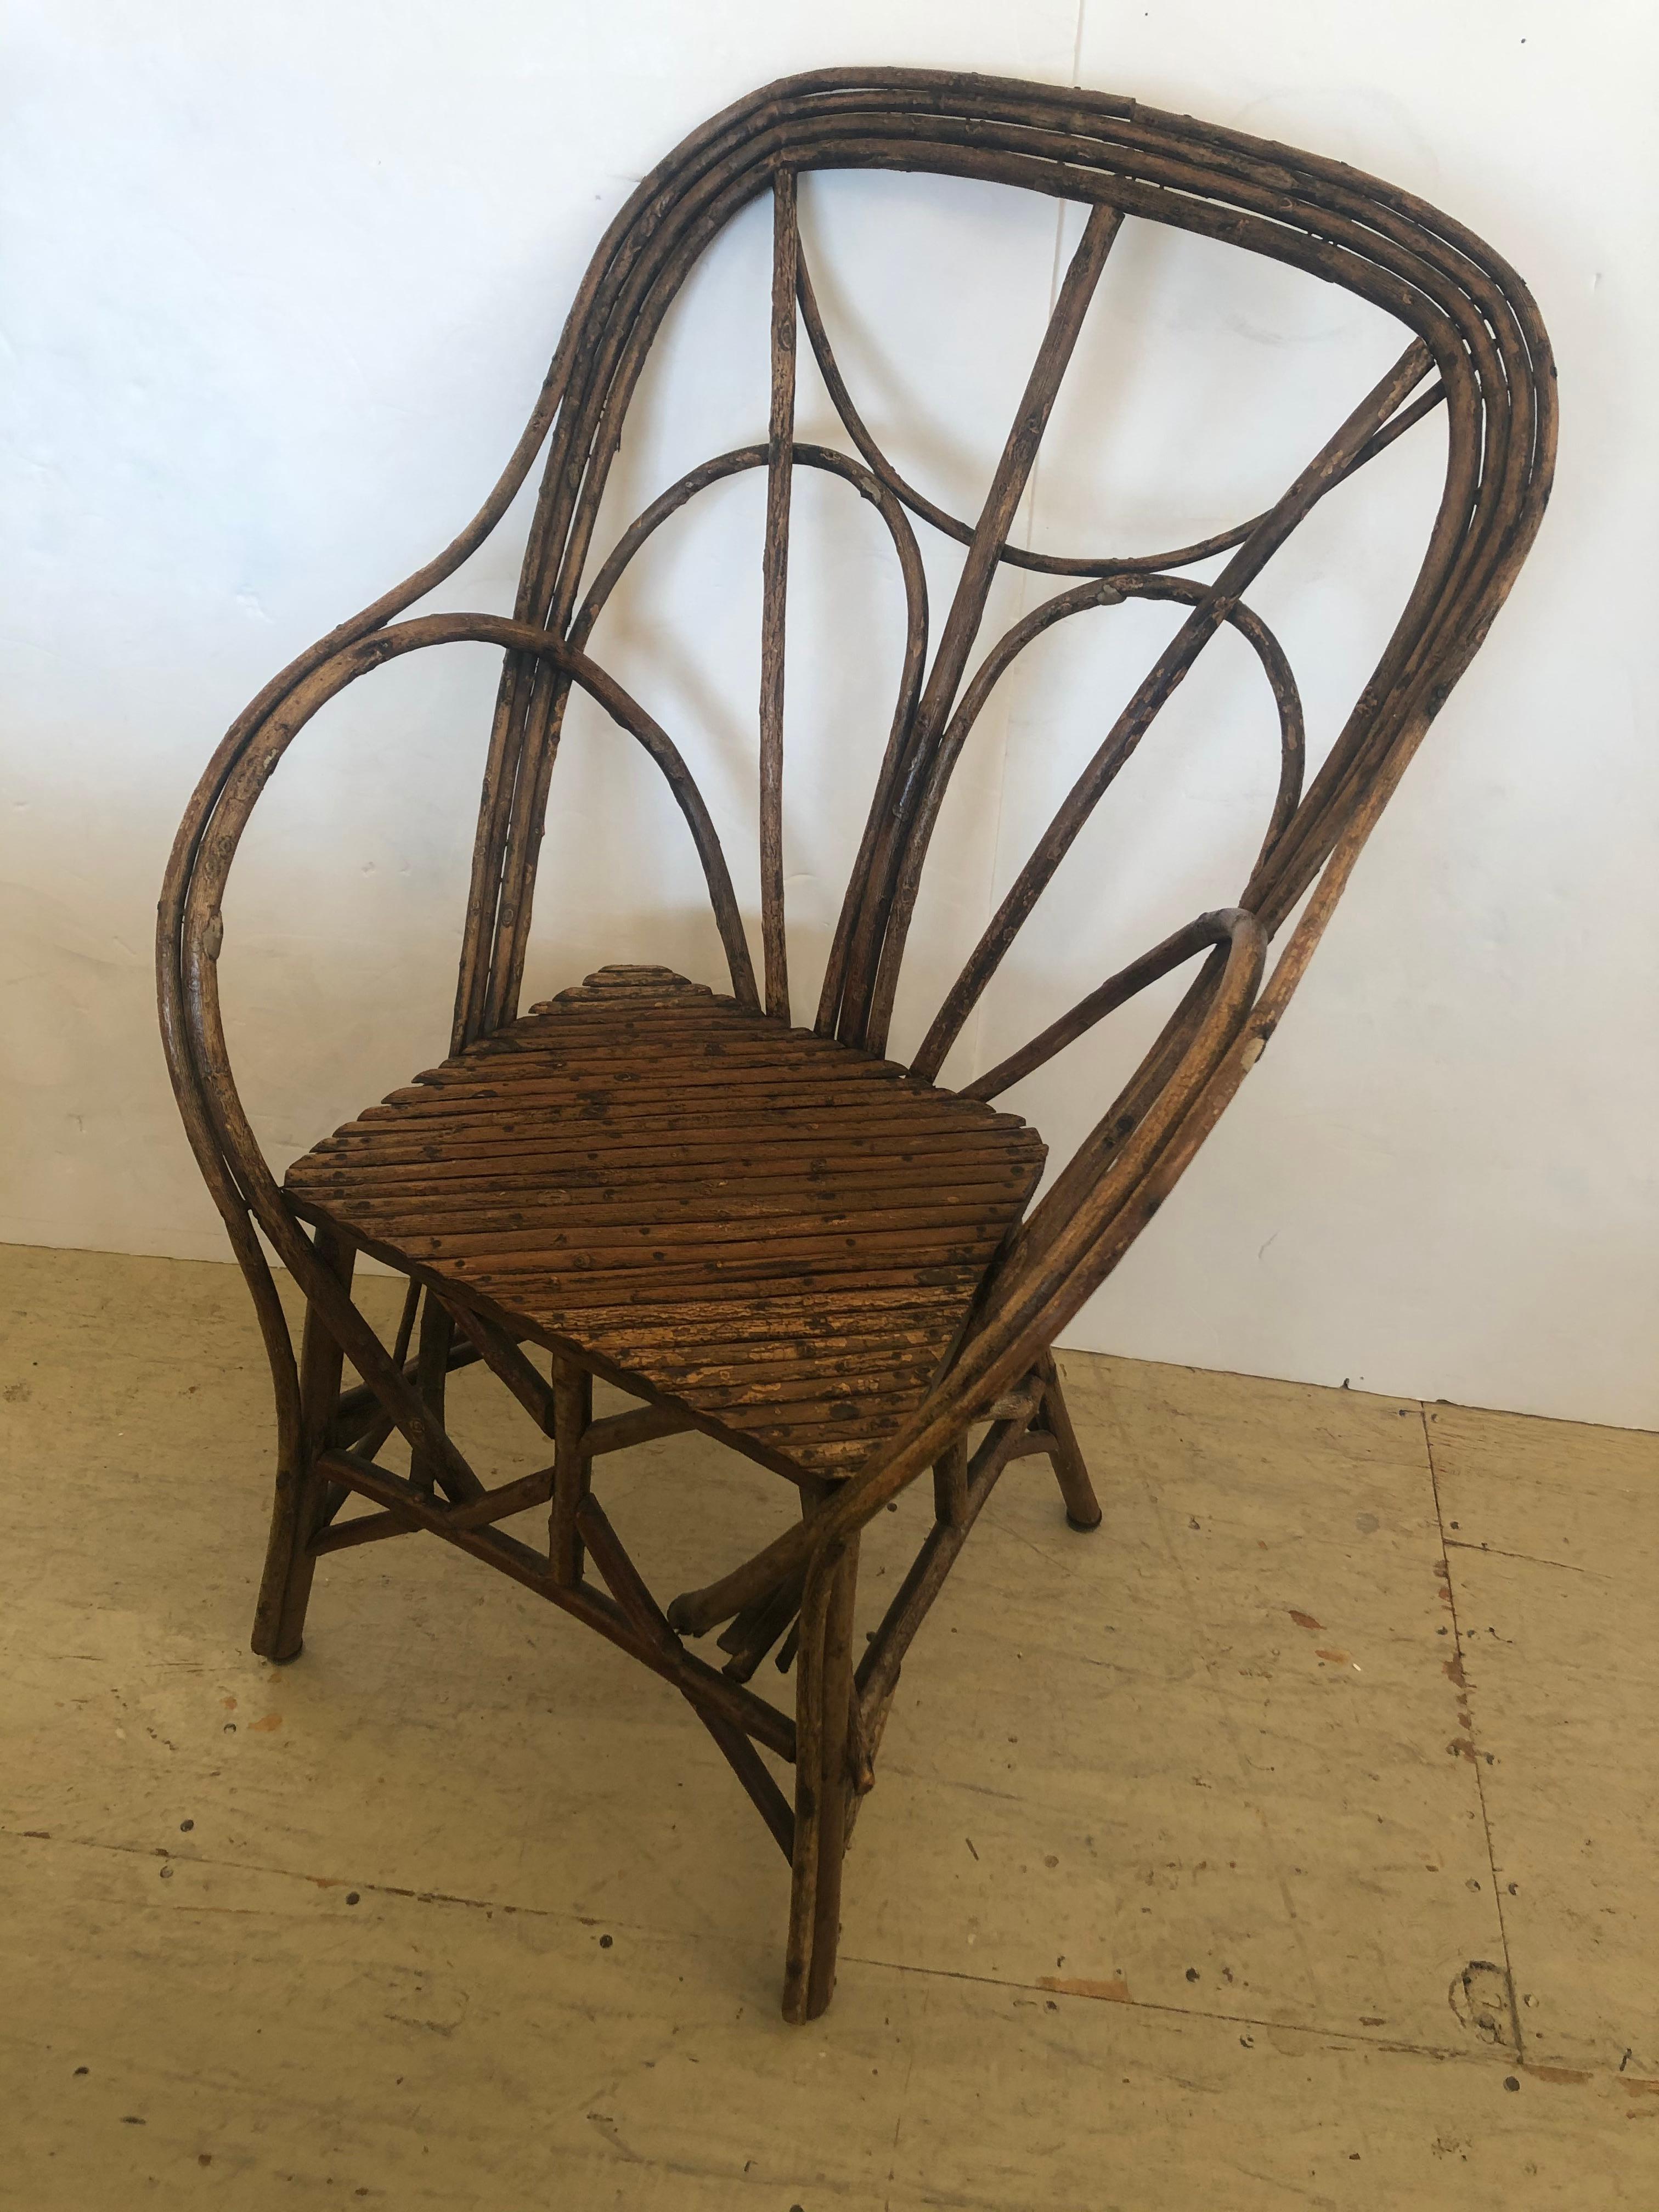 Authentic Adirondack rustic twig arm chair having beautiful workmanship and antique character. Sturdy and comfortable. Measures: Arm height 26 seat depth 11.5.